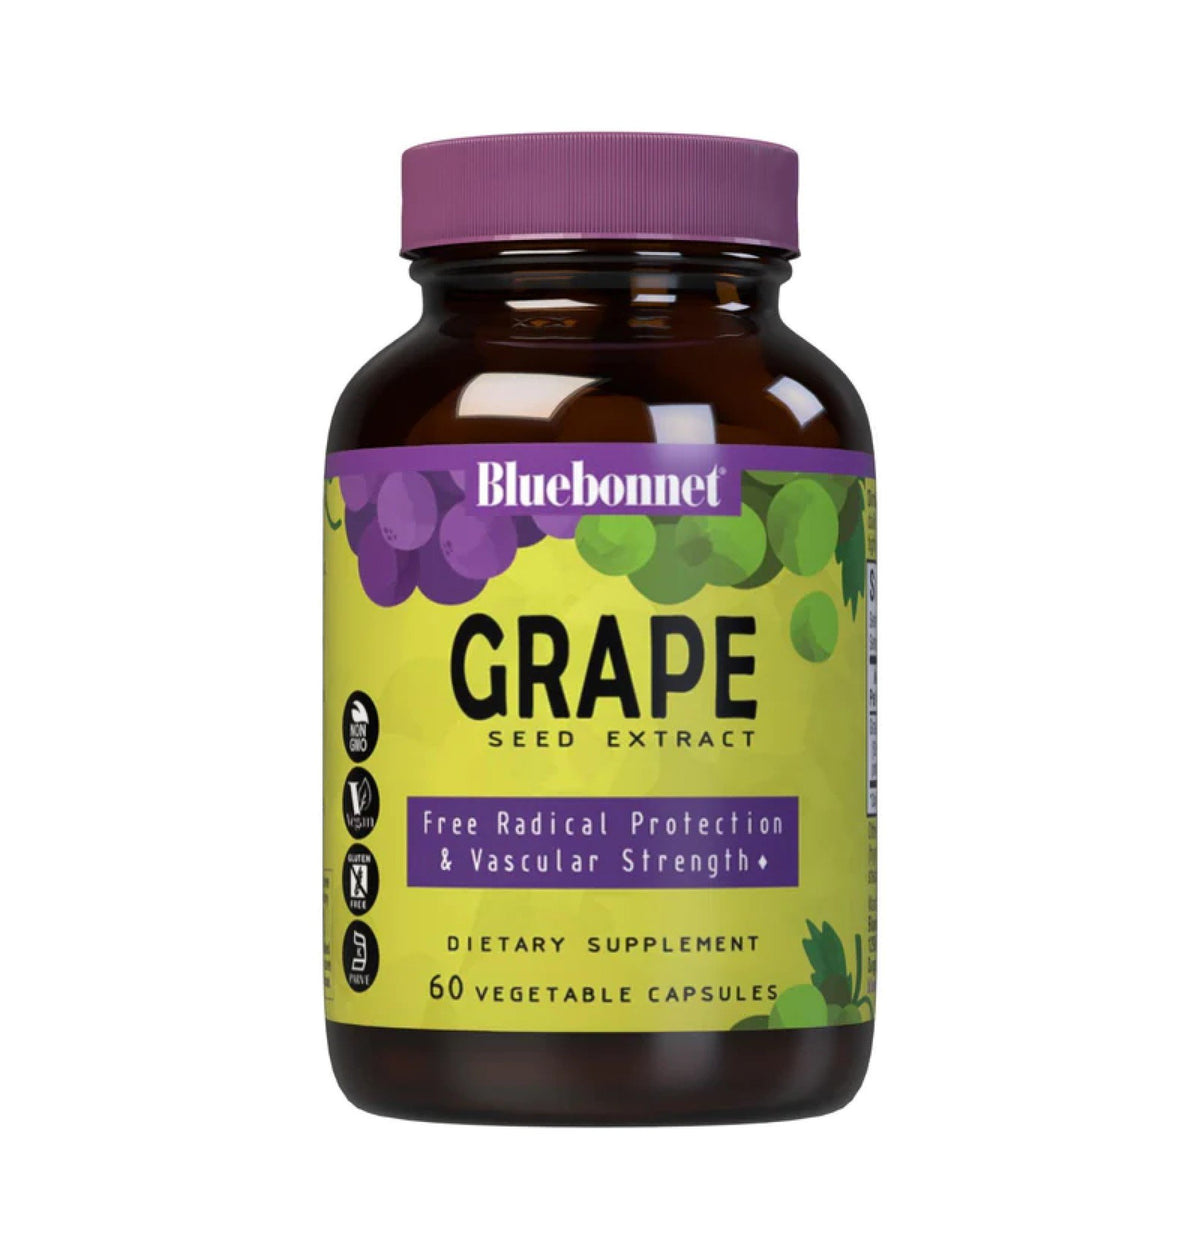 Bluebonnet Grape Seed Extract 100mg 60 Capsule